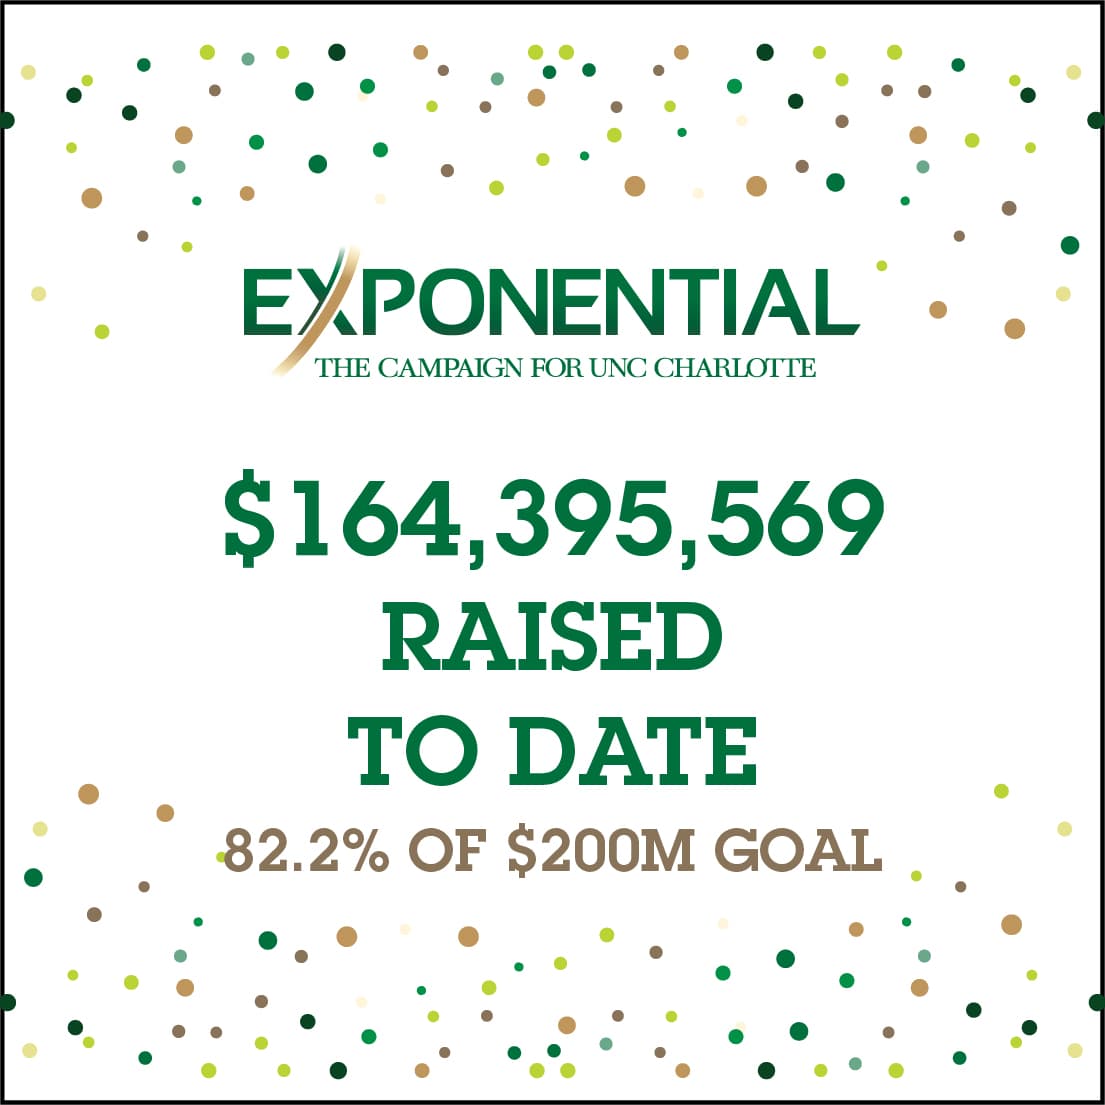 Exponential: $164,395,569 raised to date - 82.2% of $200M goal